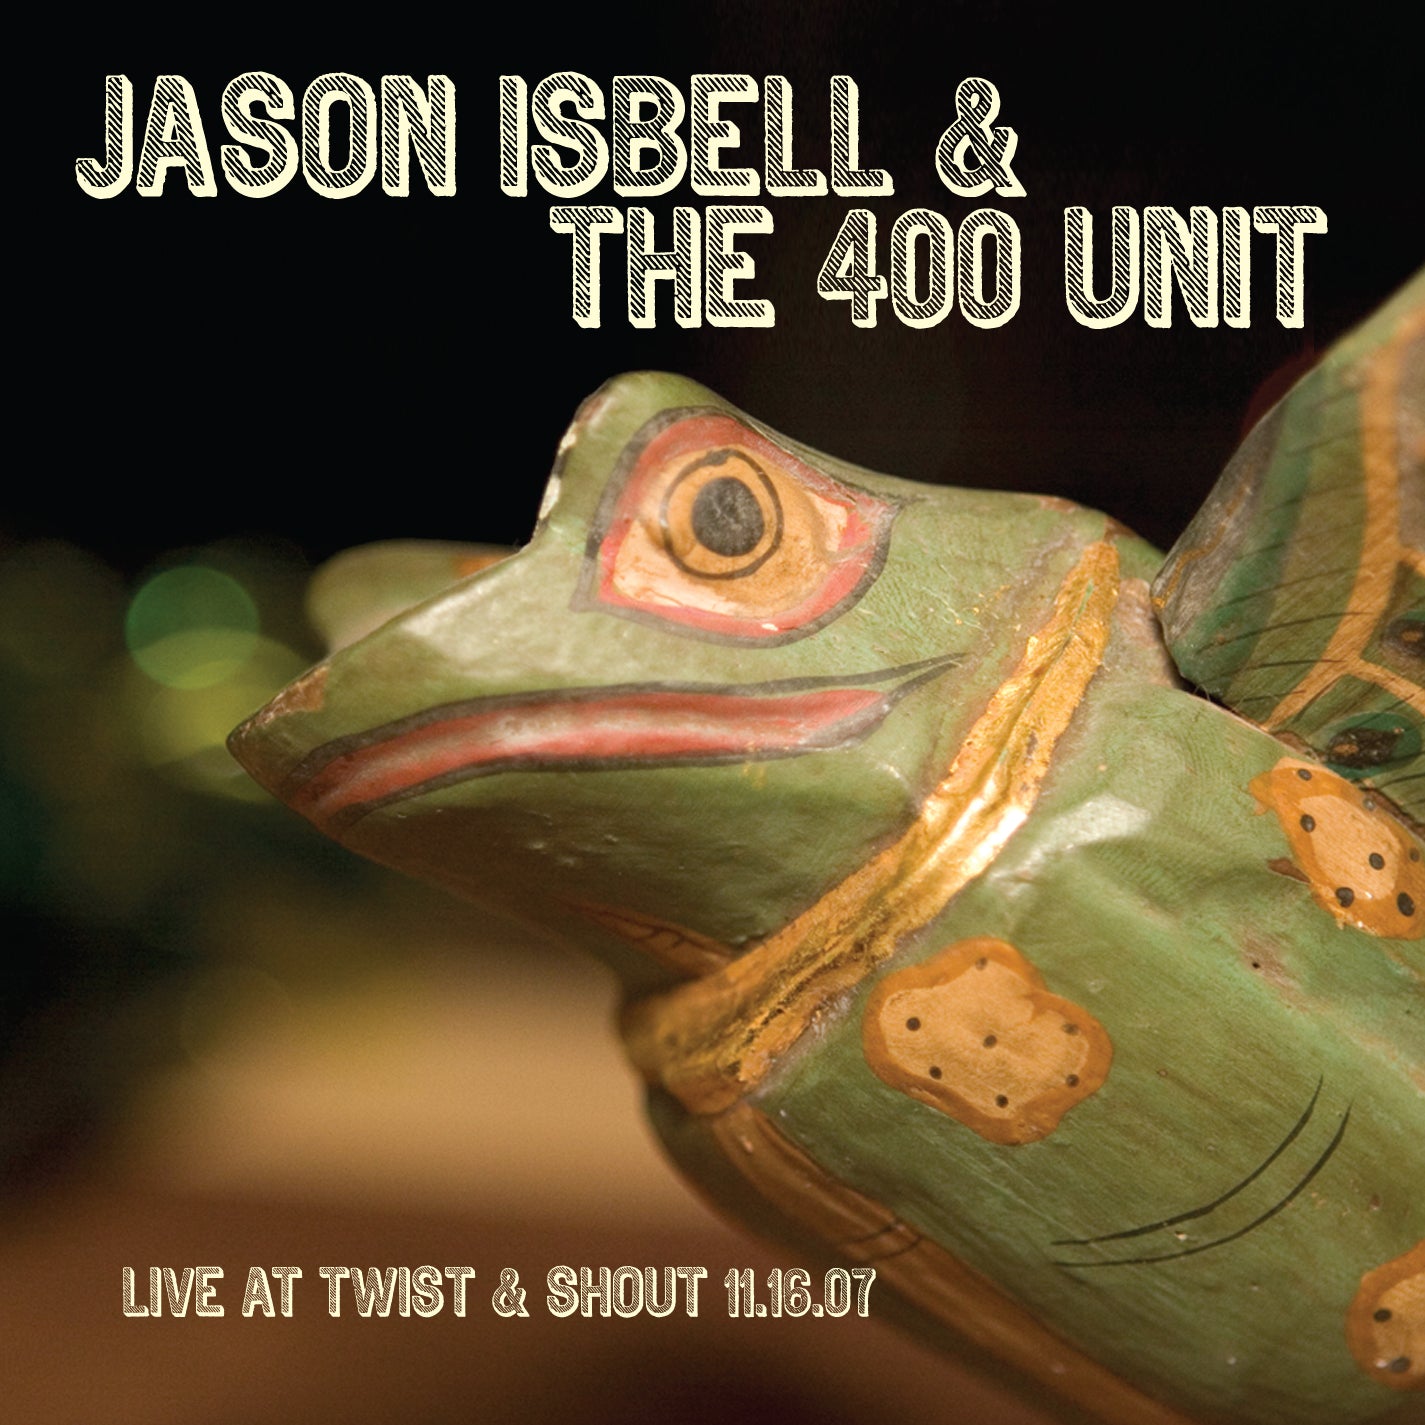 Jason Isbell & The 400 Unit - Live At Twist And Shout 11.06.07 [CD]